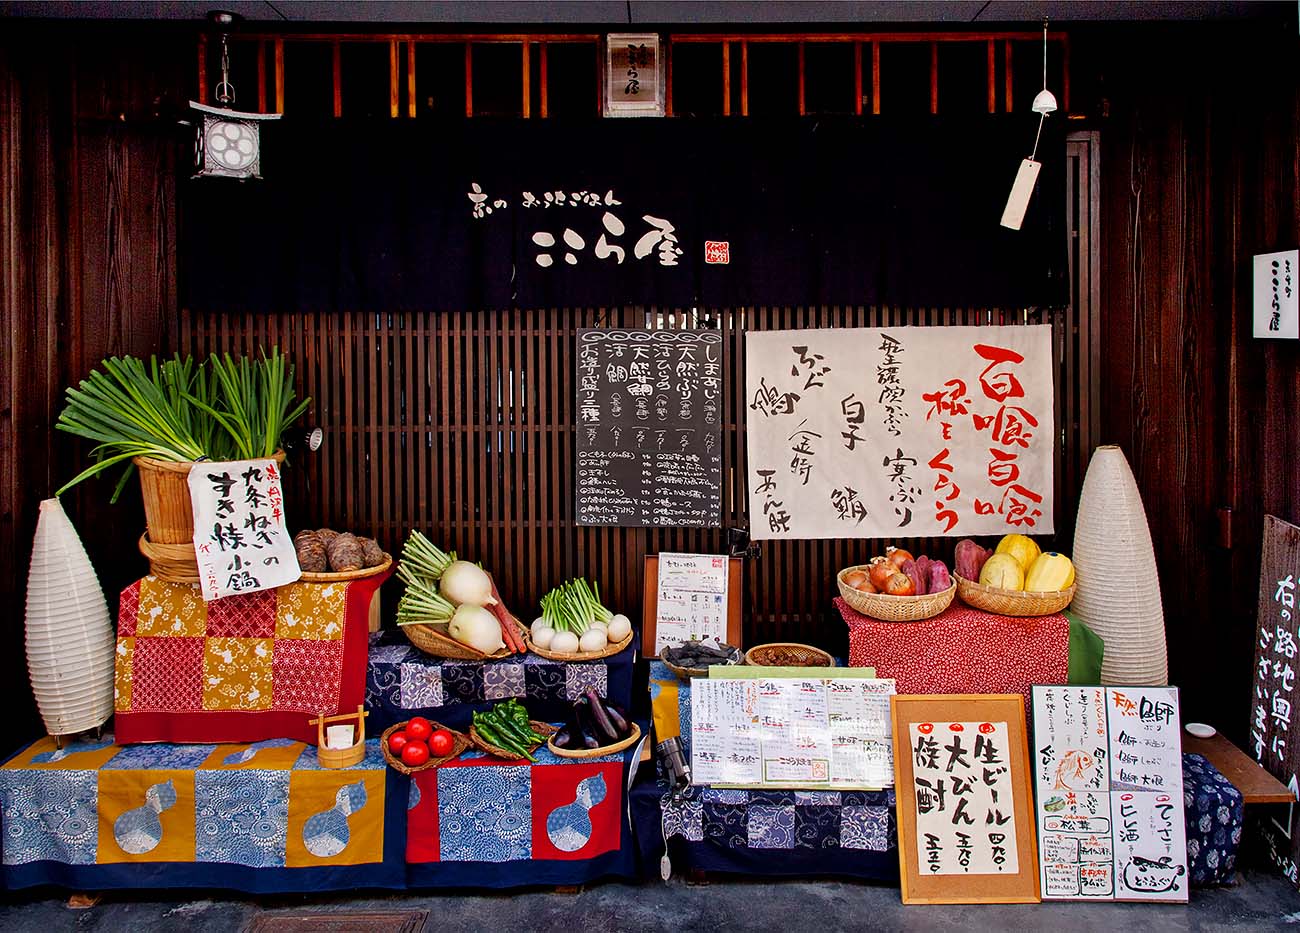 Pontochoco-dori Shop Display from the series 'An Intimate View of Japan.' Photo: Don Jacobson